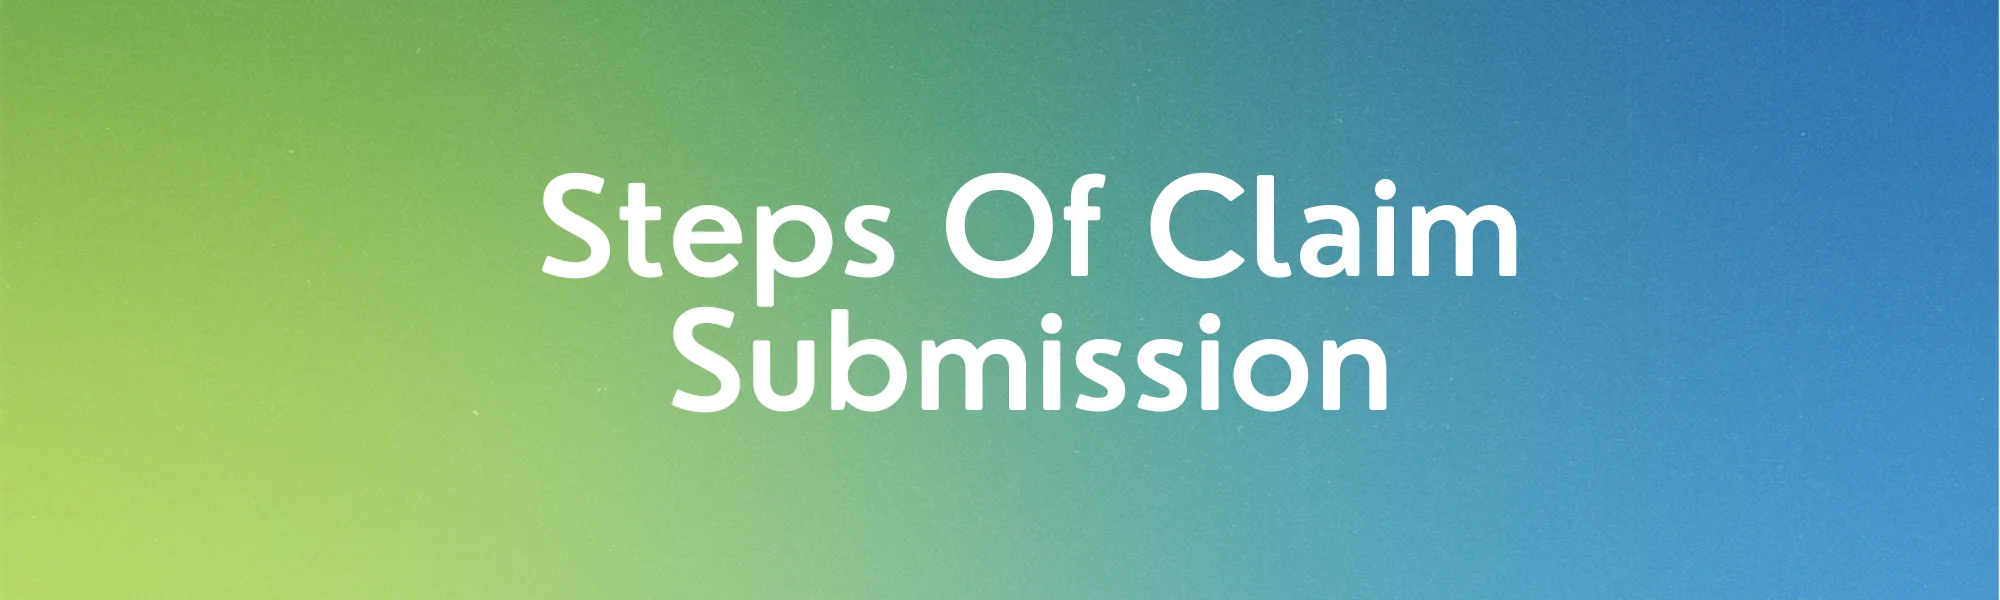 Steps Of Claim Submission